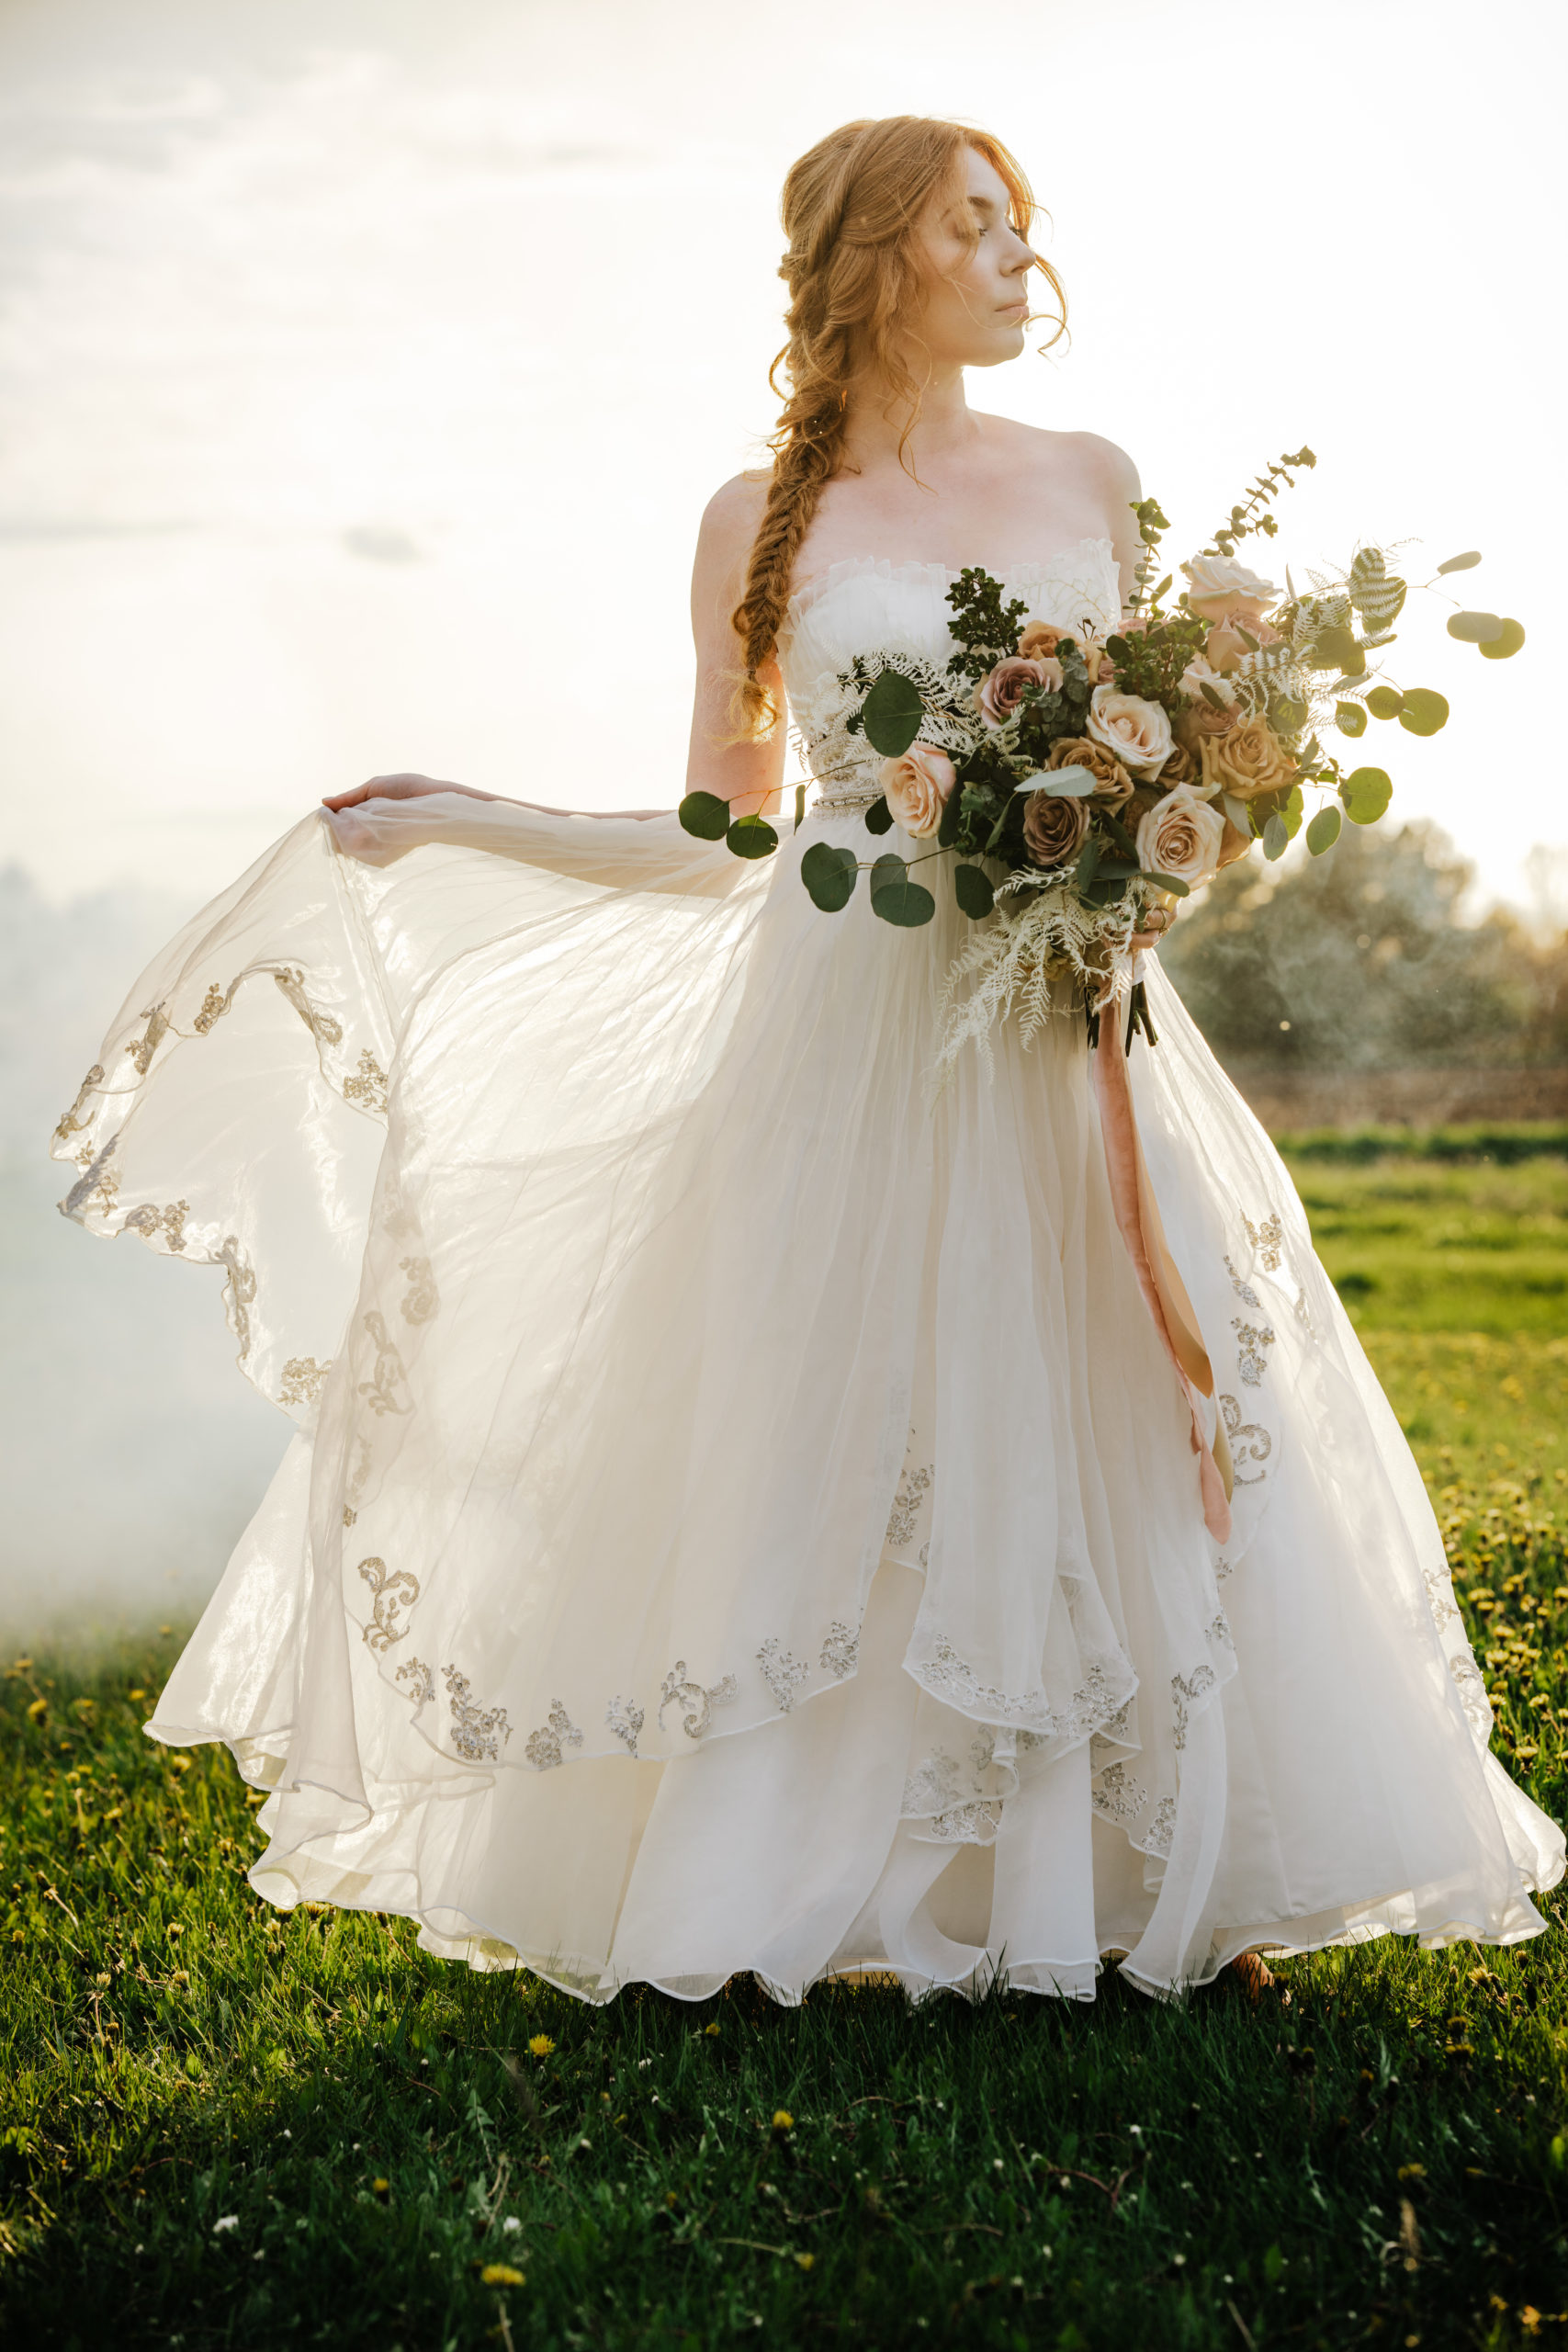 Bride in a field holding a bouquet at sunset